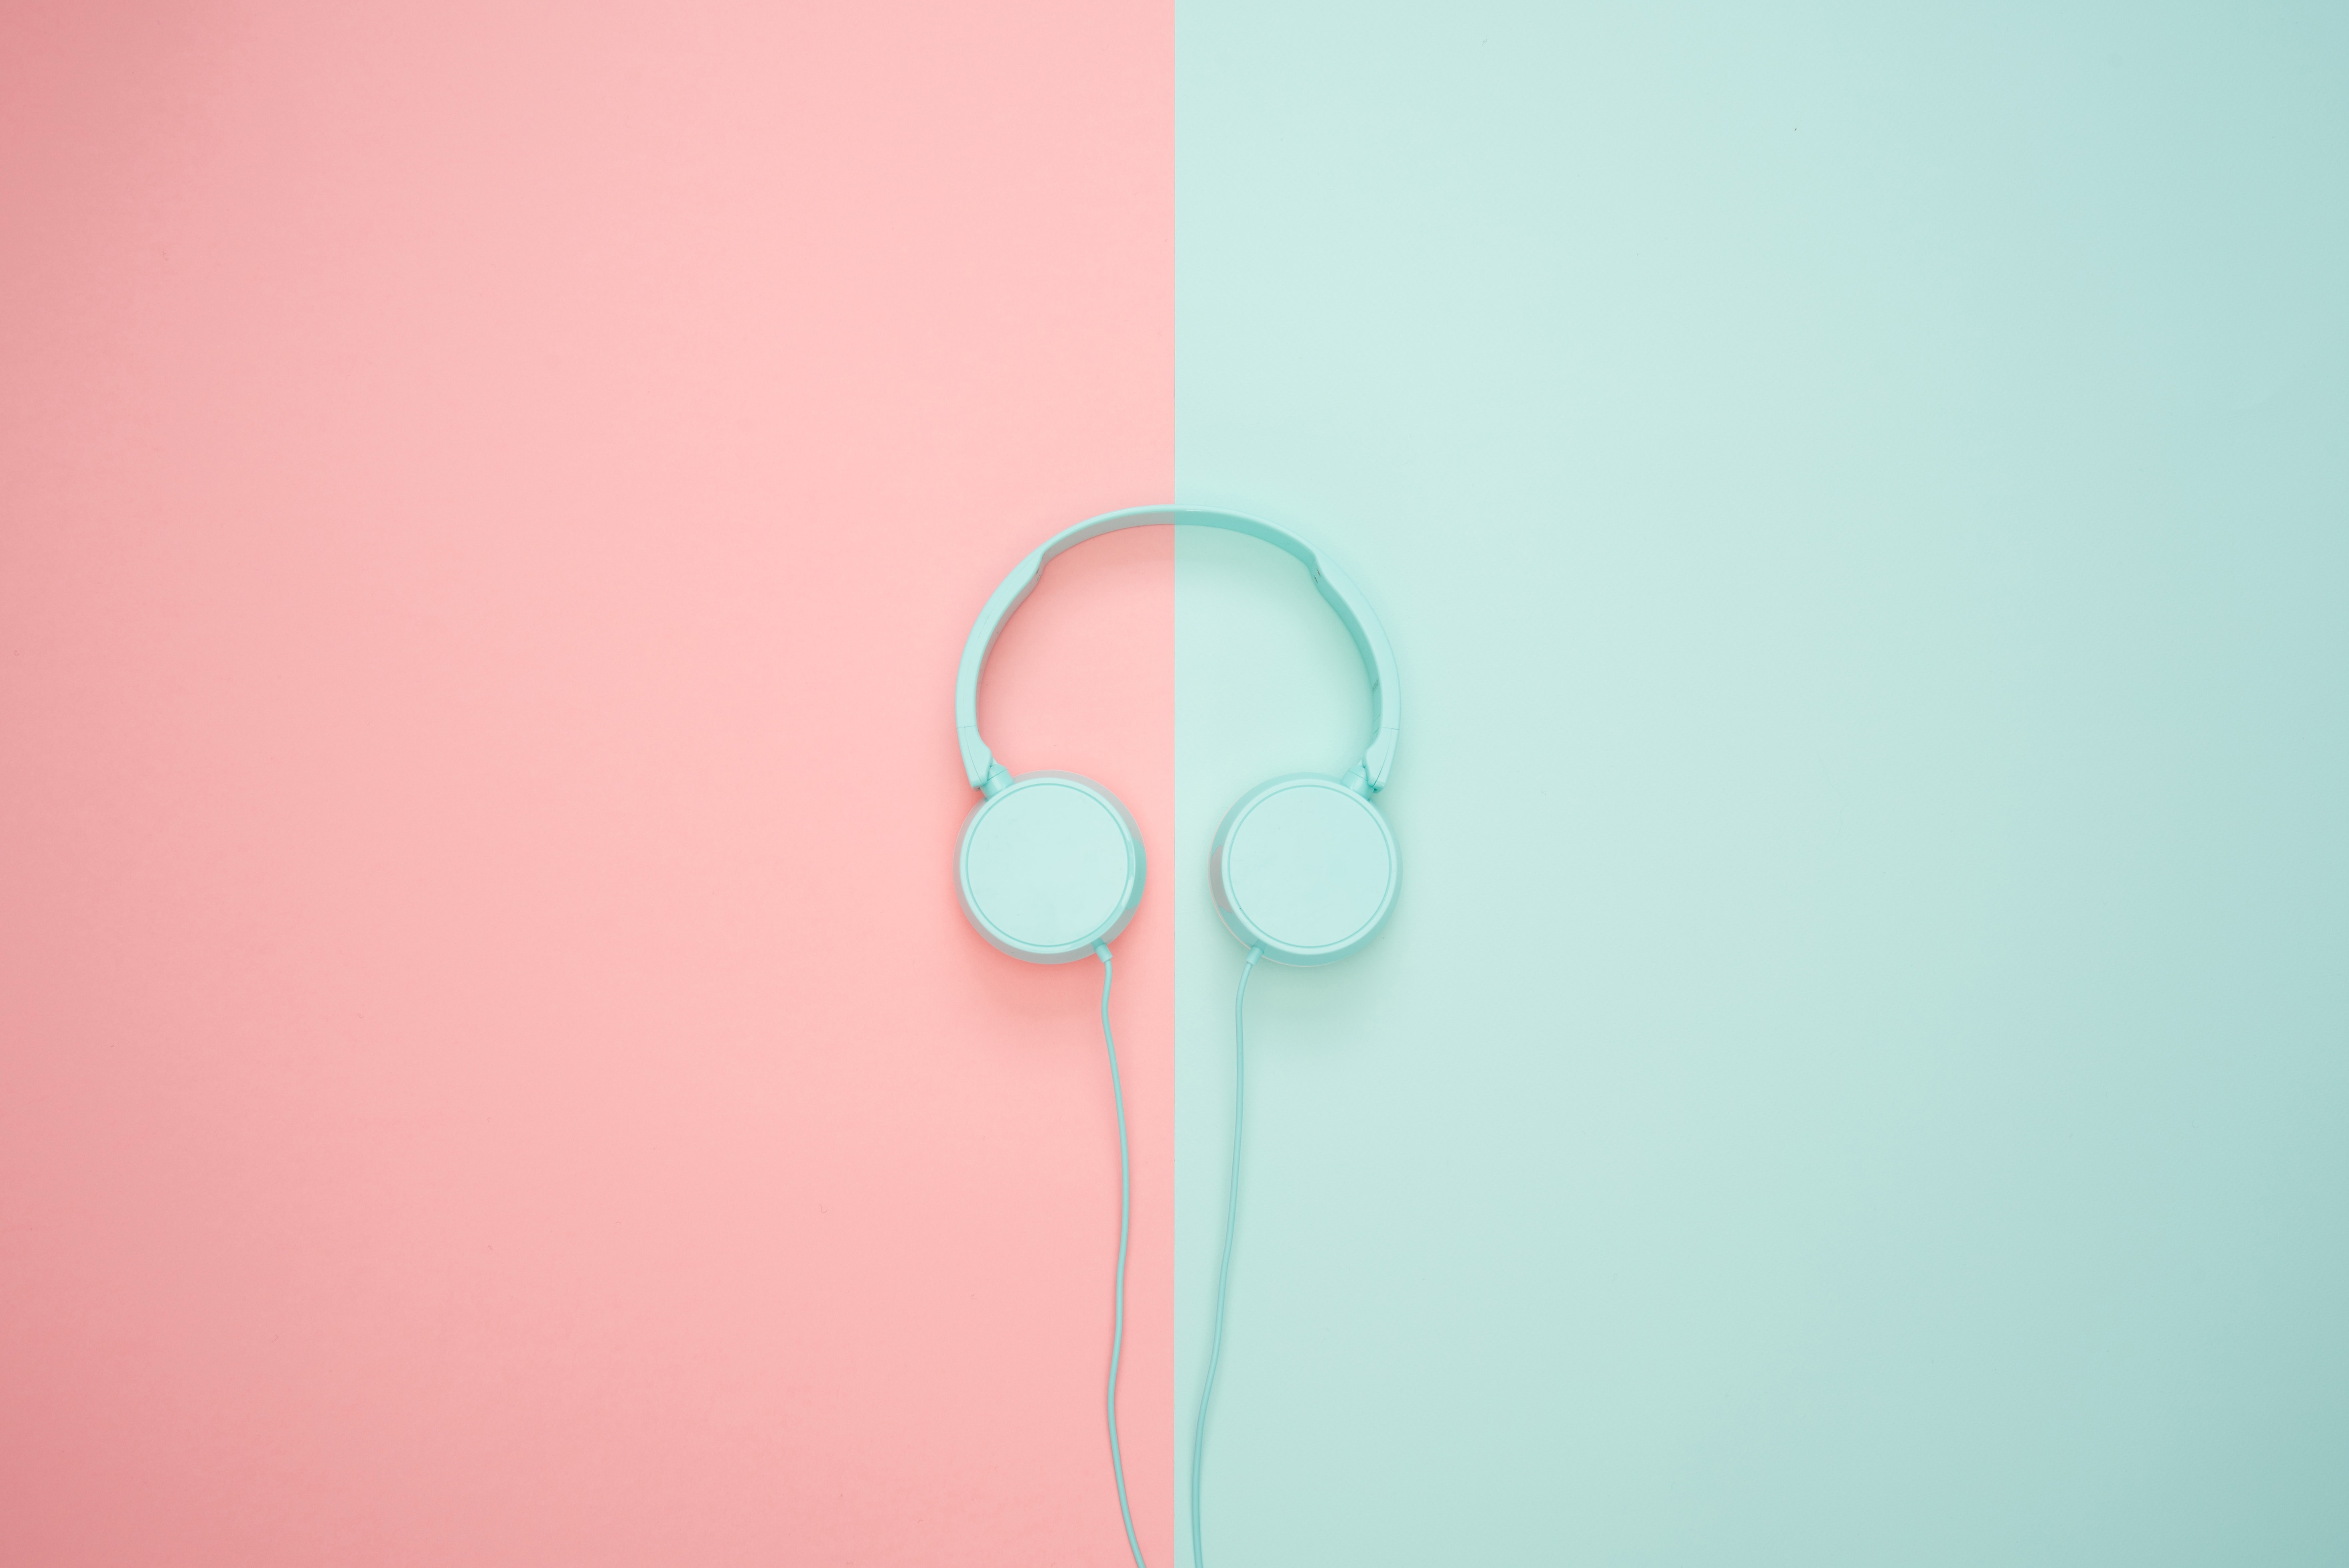 image of headphones on a pink and green background